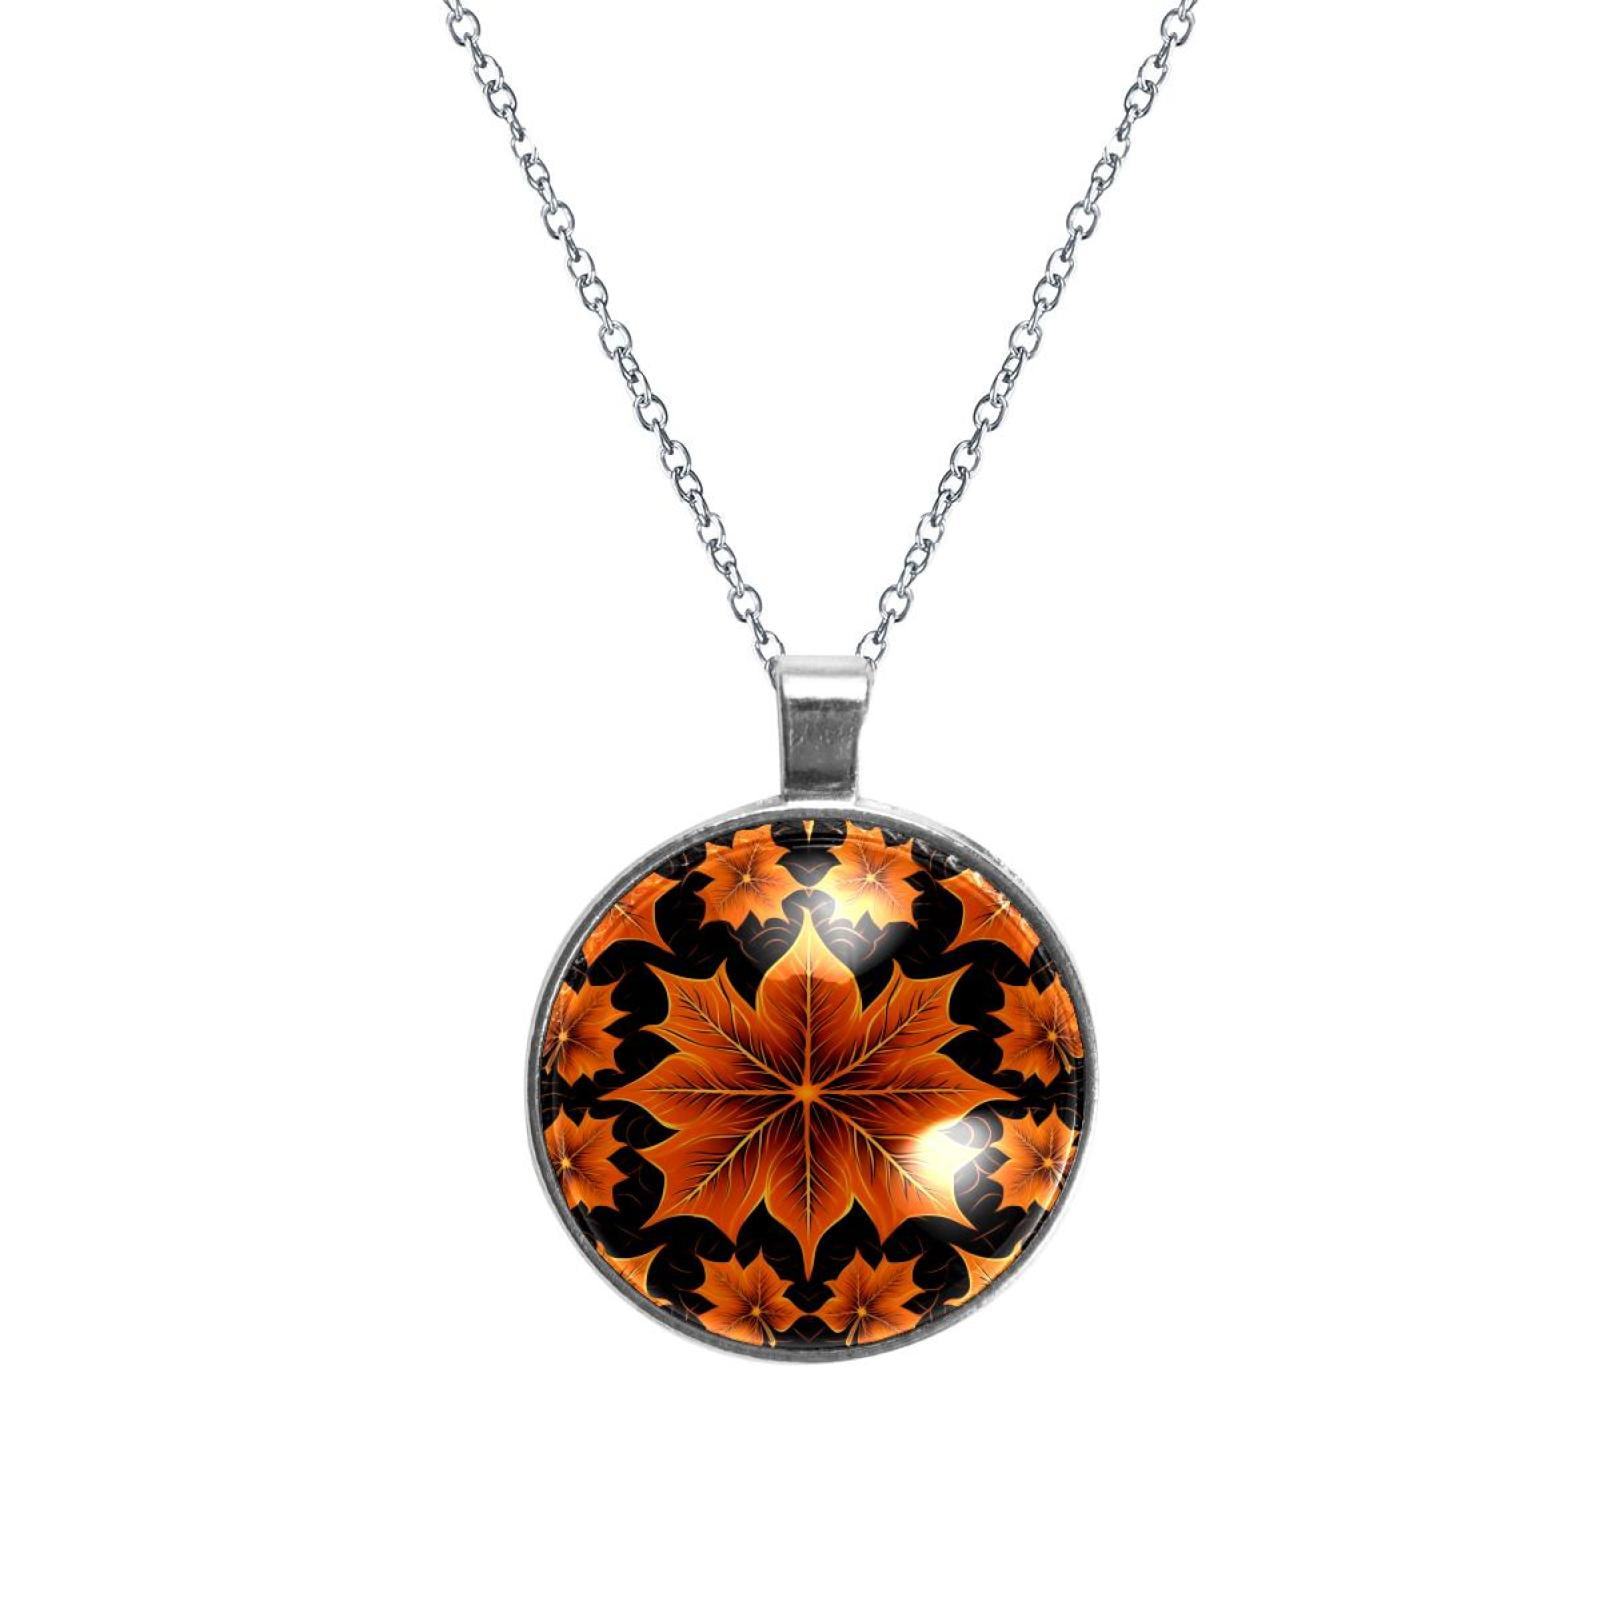 Maple leaves Glass Circular Pendant Necklace - Elegant Jewelry for ...